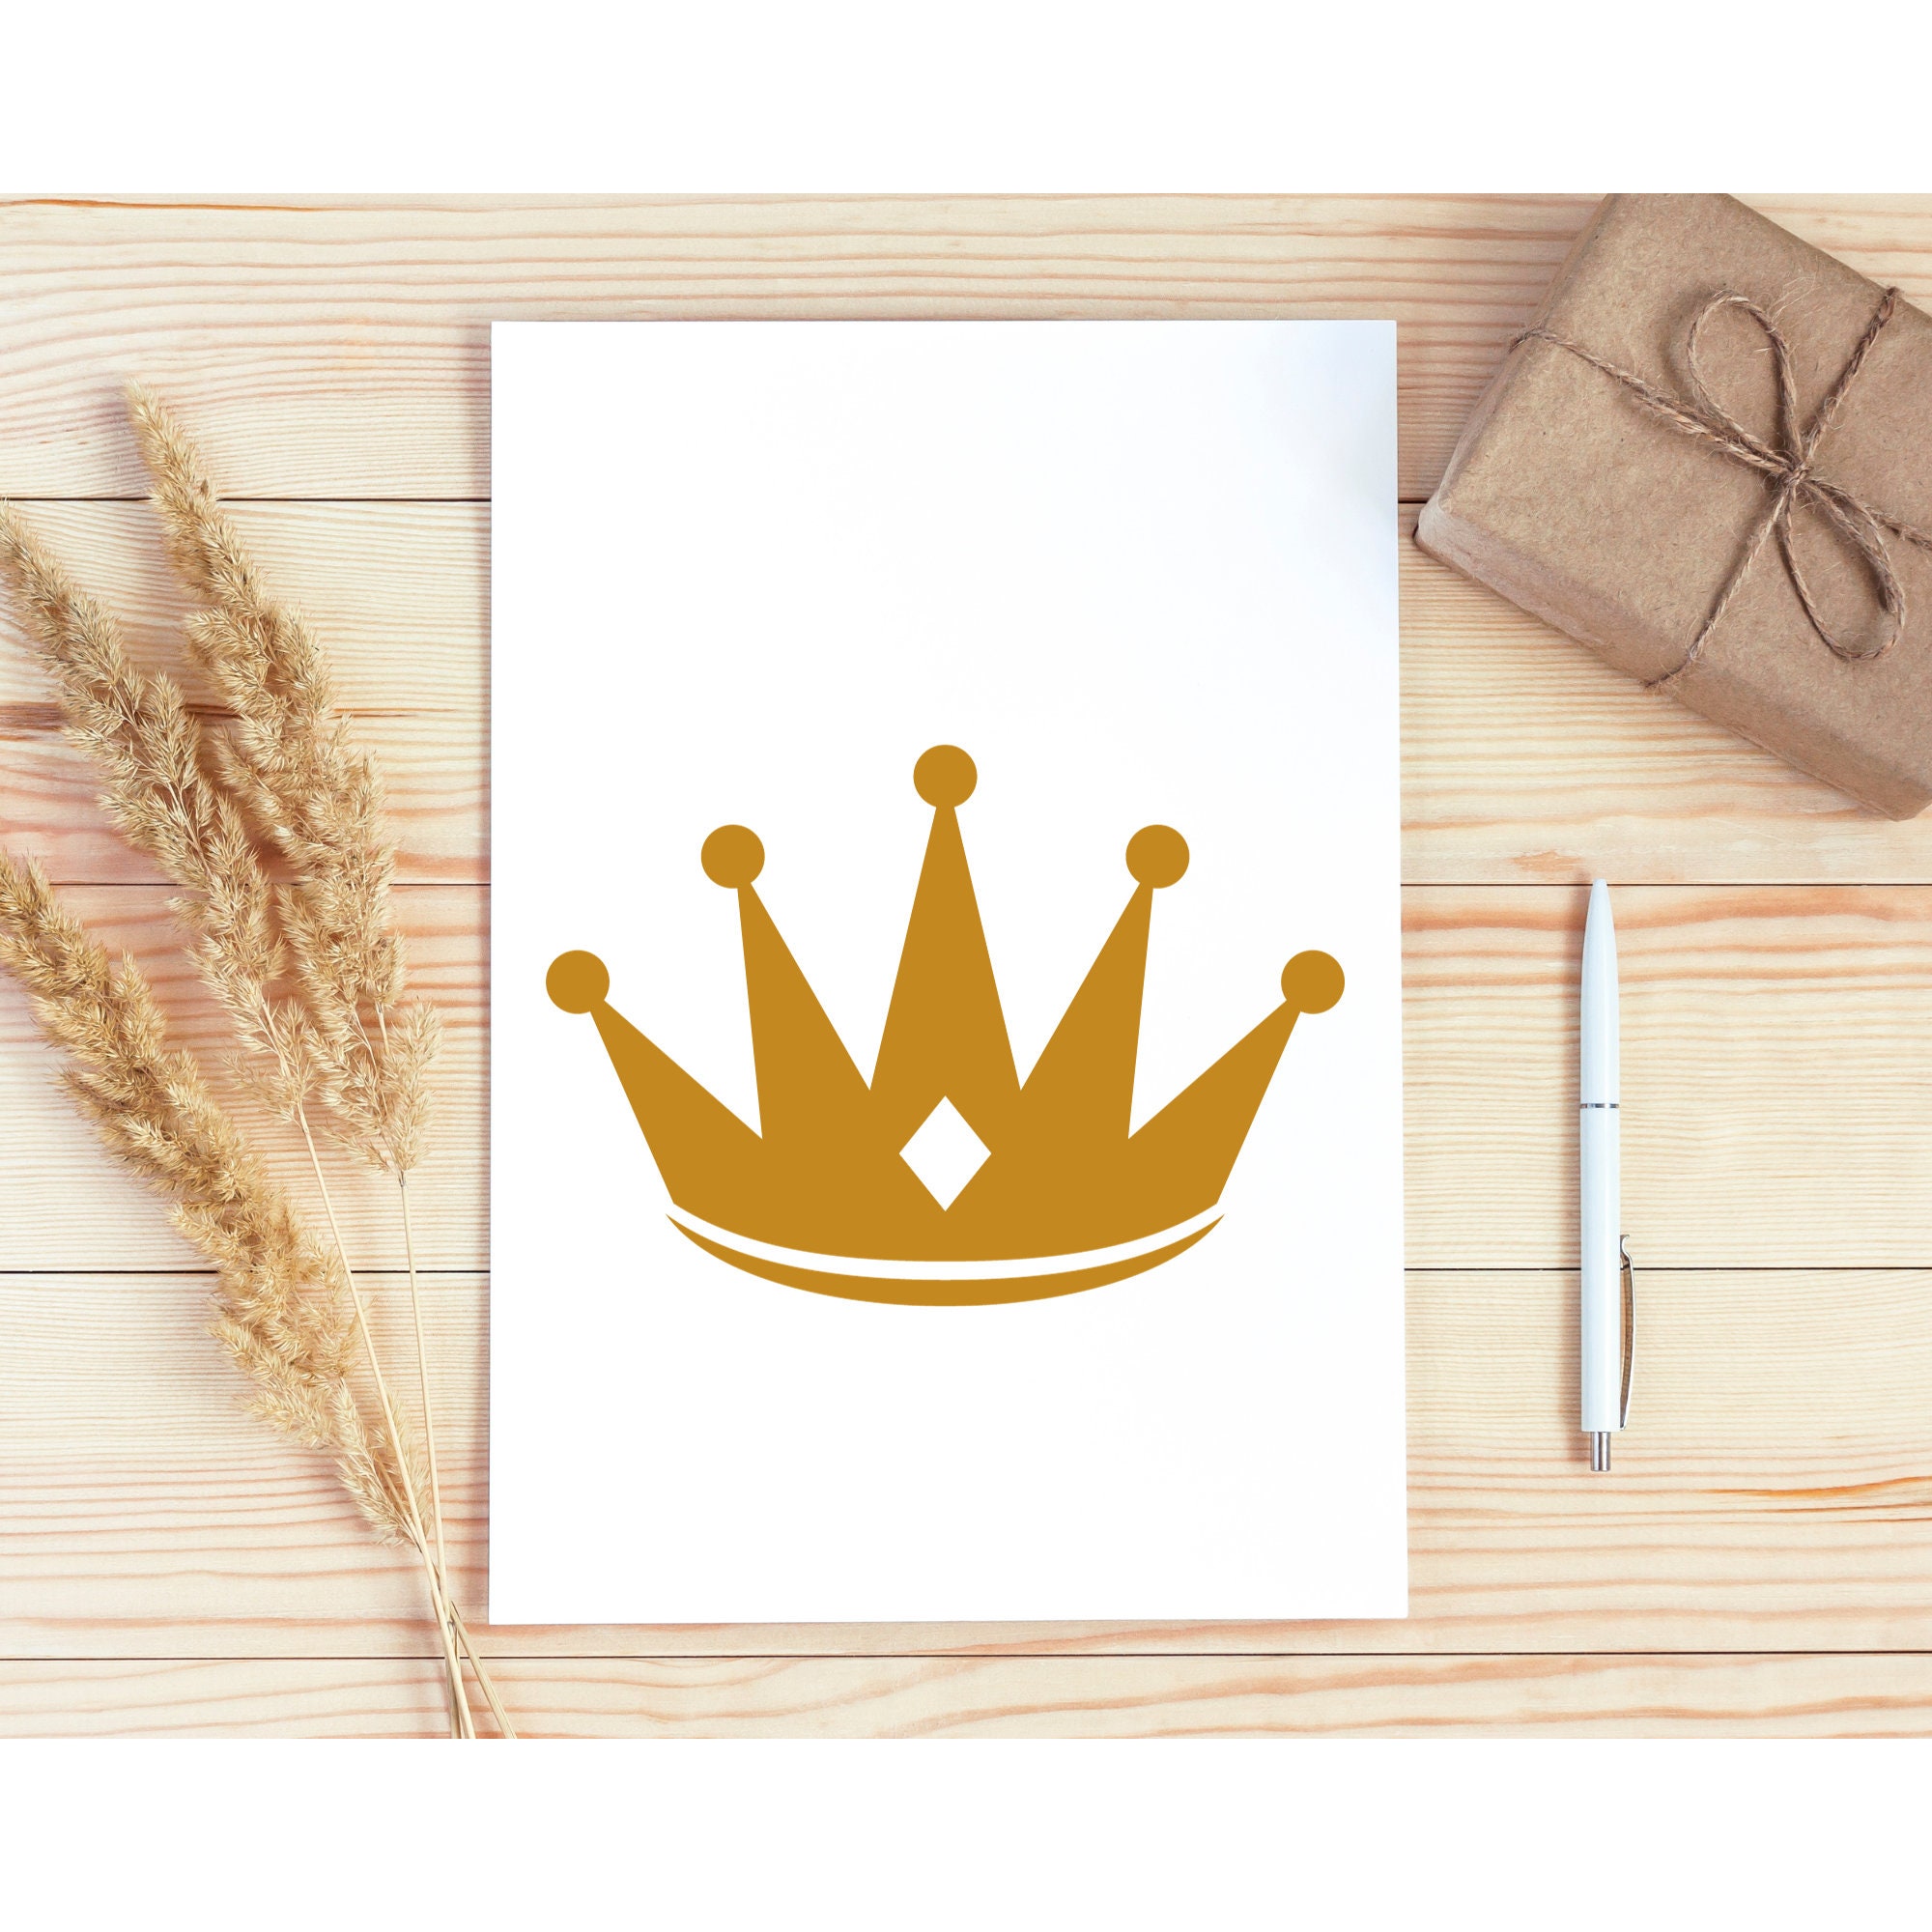 Card With A Crown And The Text: You Are My QUEEN Royalty Free SVG,  Cliparts, Vetores, e Ilustrações Stock. Image 43585070.